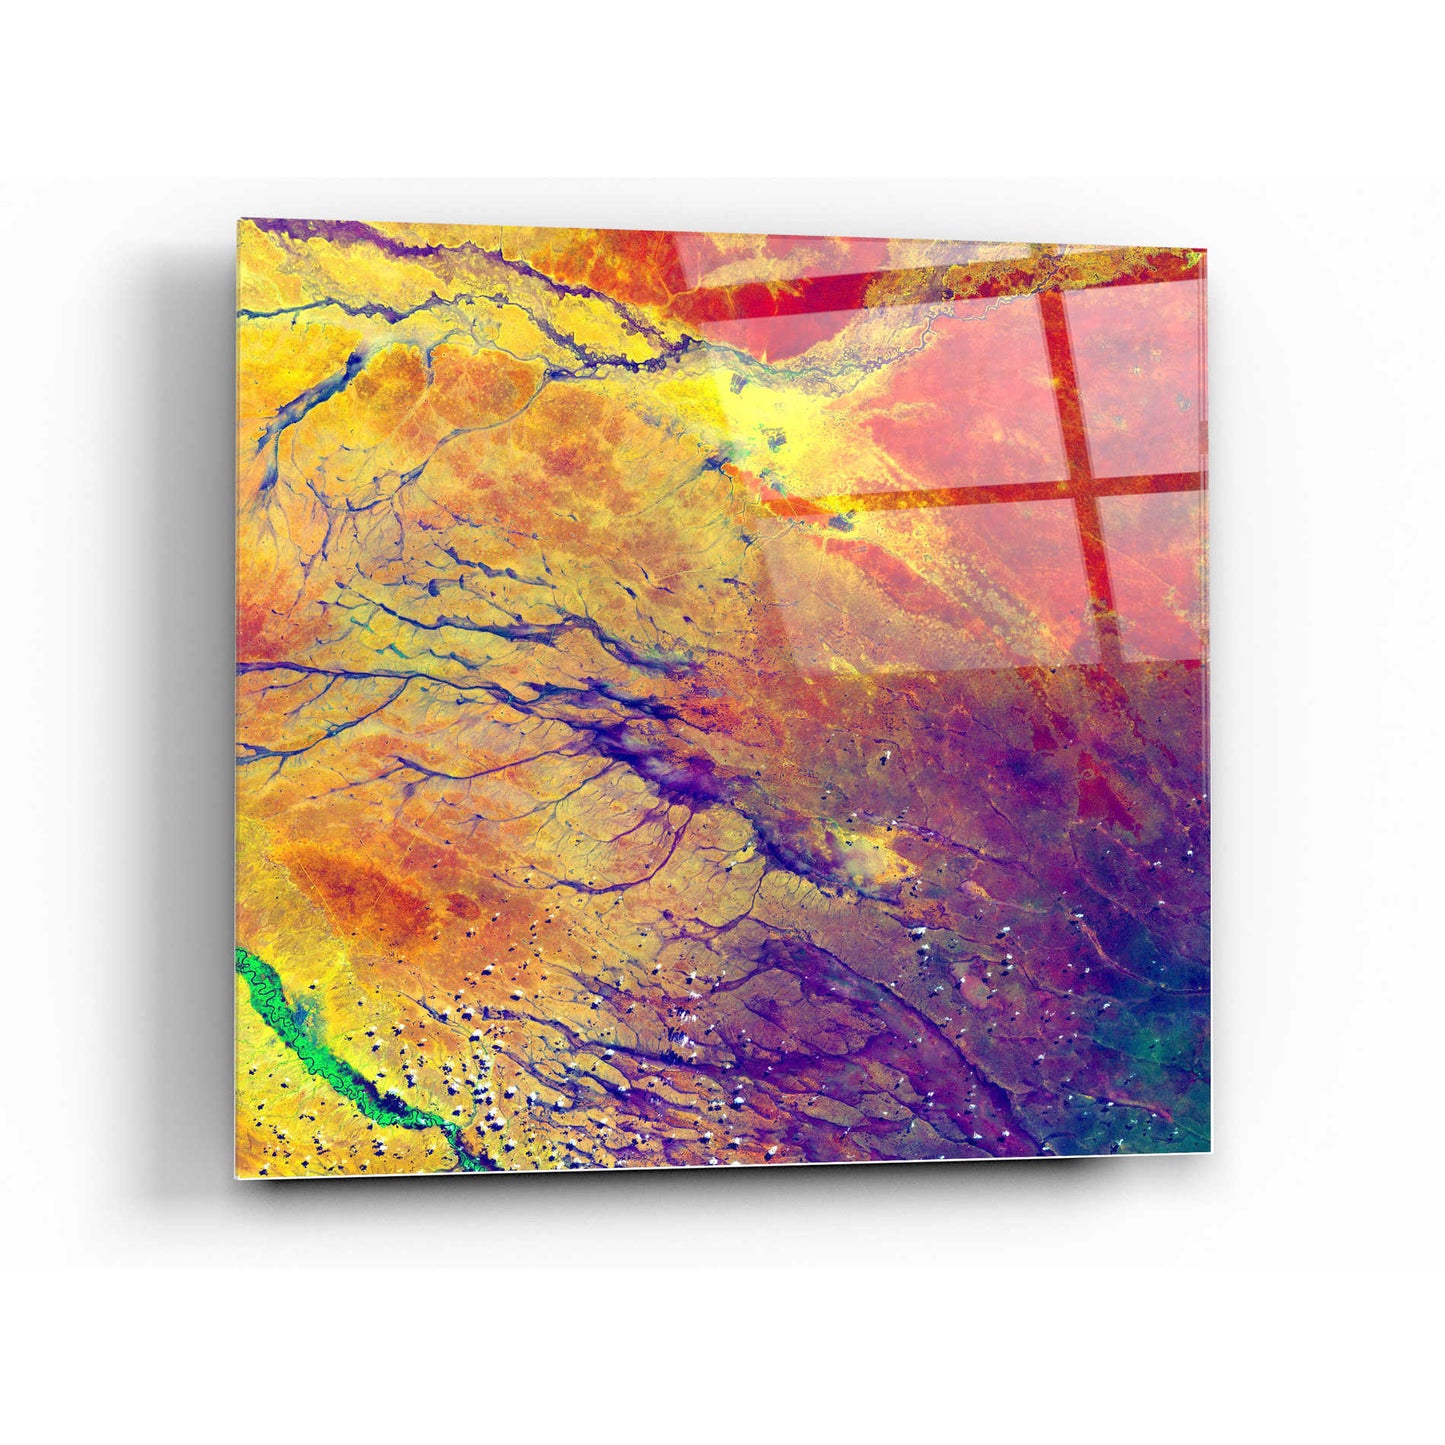 Epic Art 'Earth As Art: A Study in Color' Acrylic Glass Wall Art,24x24